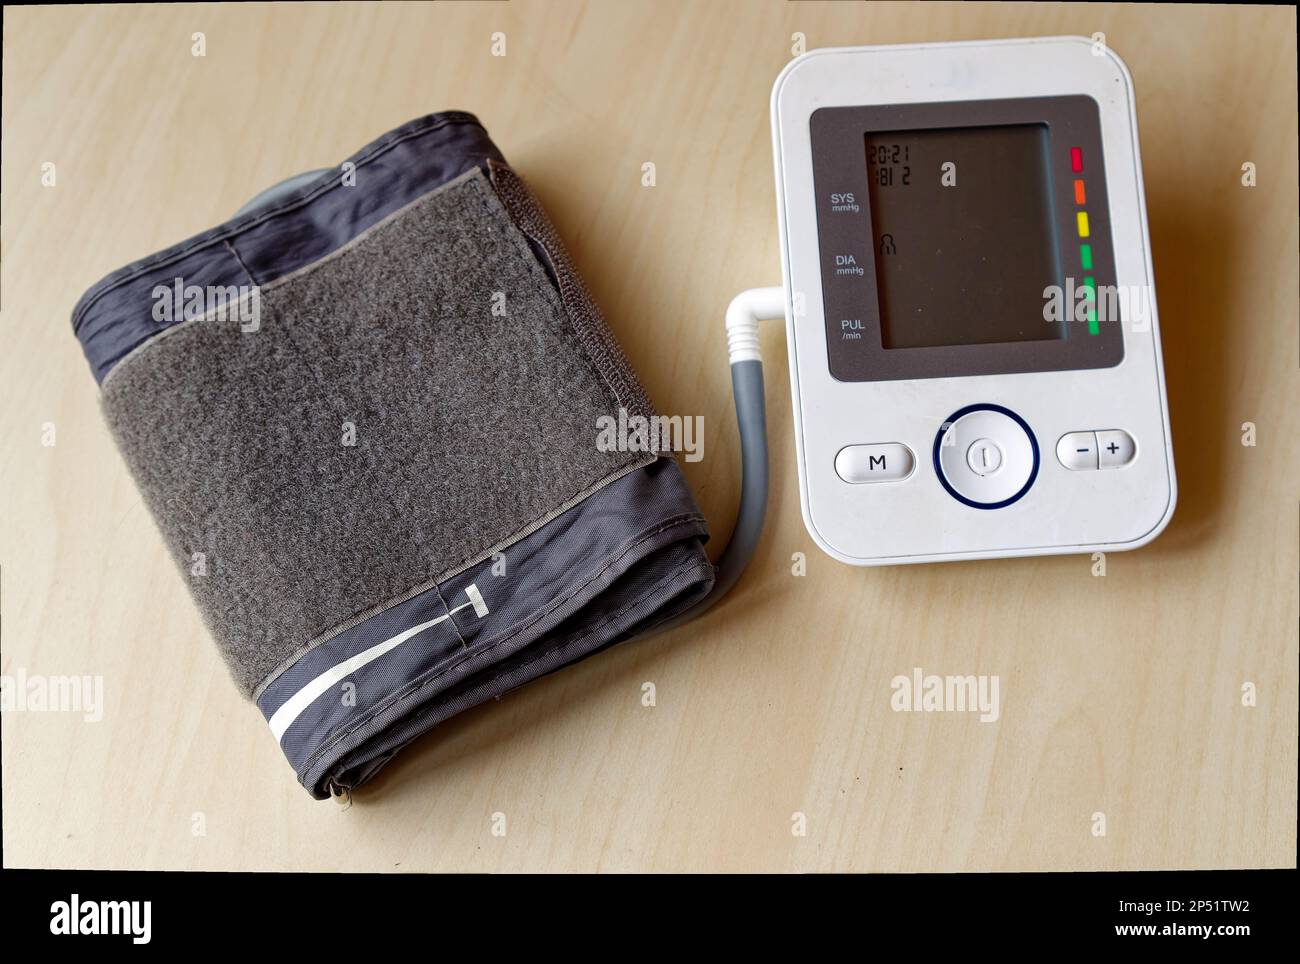 https://c8.alamy.com/comp/2P51TW2/medical-devices-blood-pressure-monitor-for-measuring-on-the-upper-arm-2P51TW2.jpg